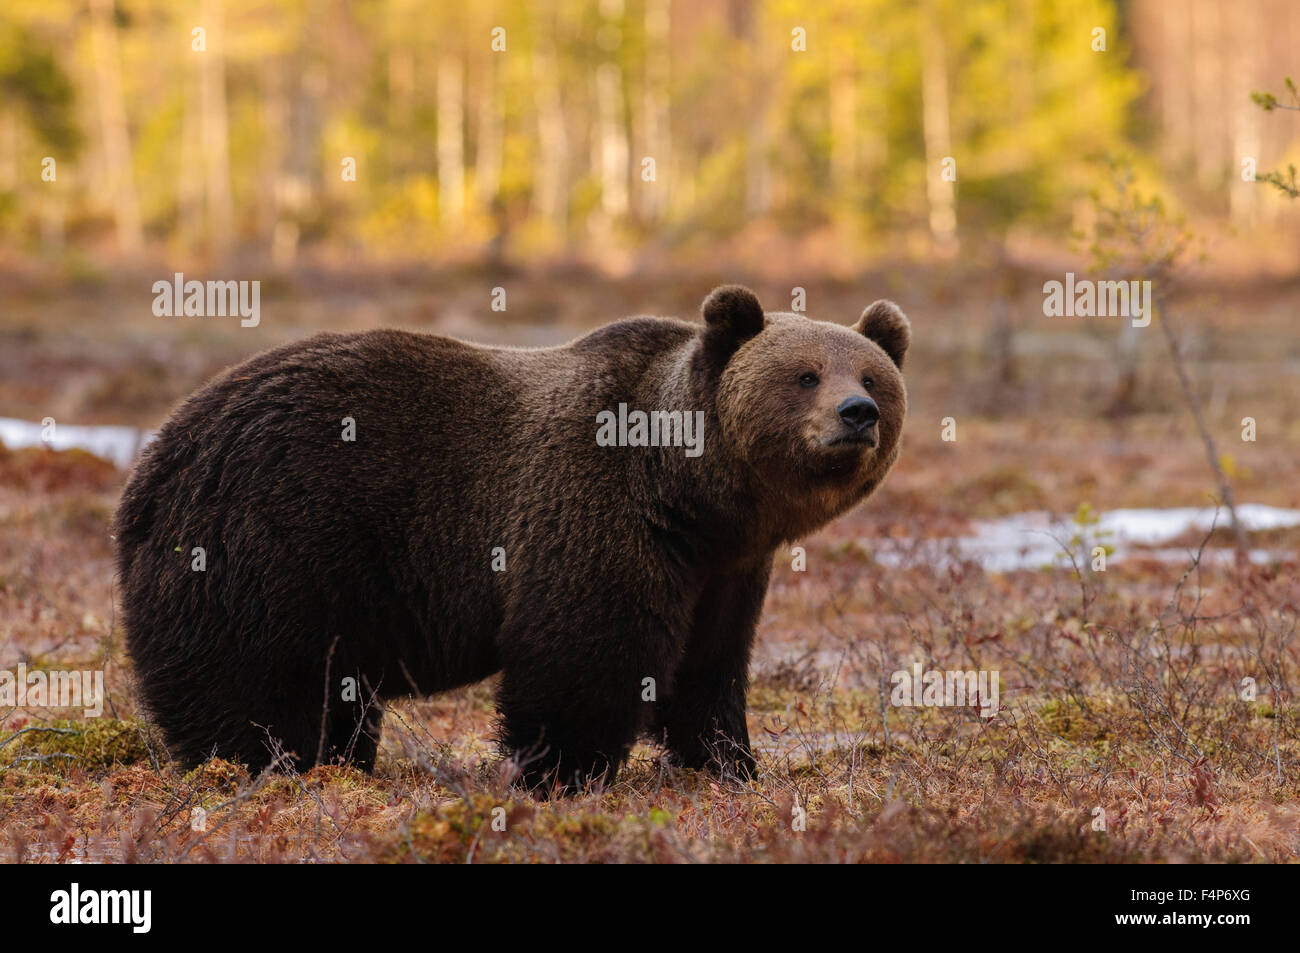 European brown bear in snow and warm evening light in early spring in taiga forest in Finland. Stock Photo